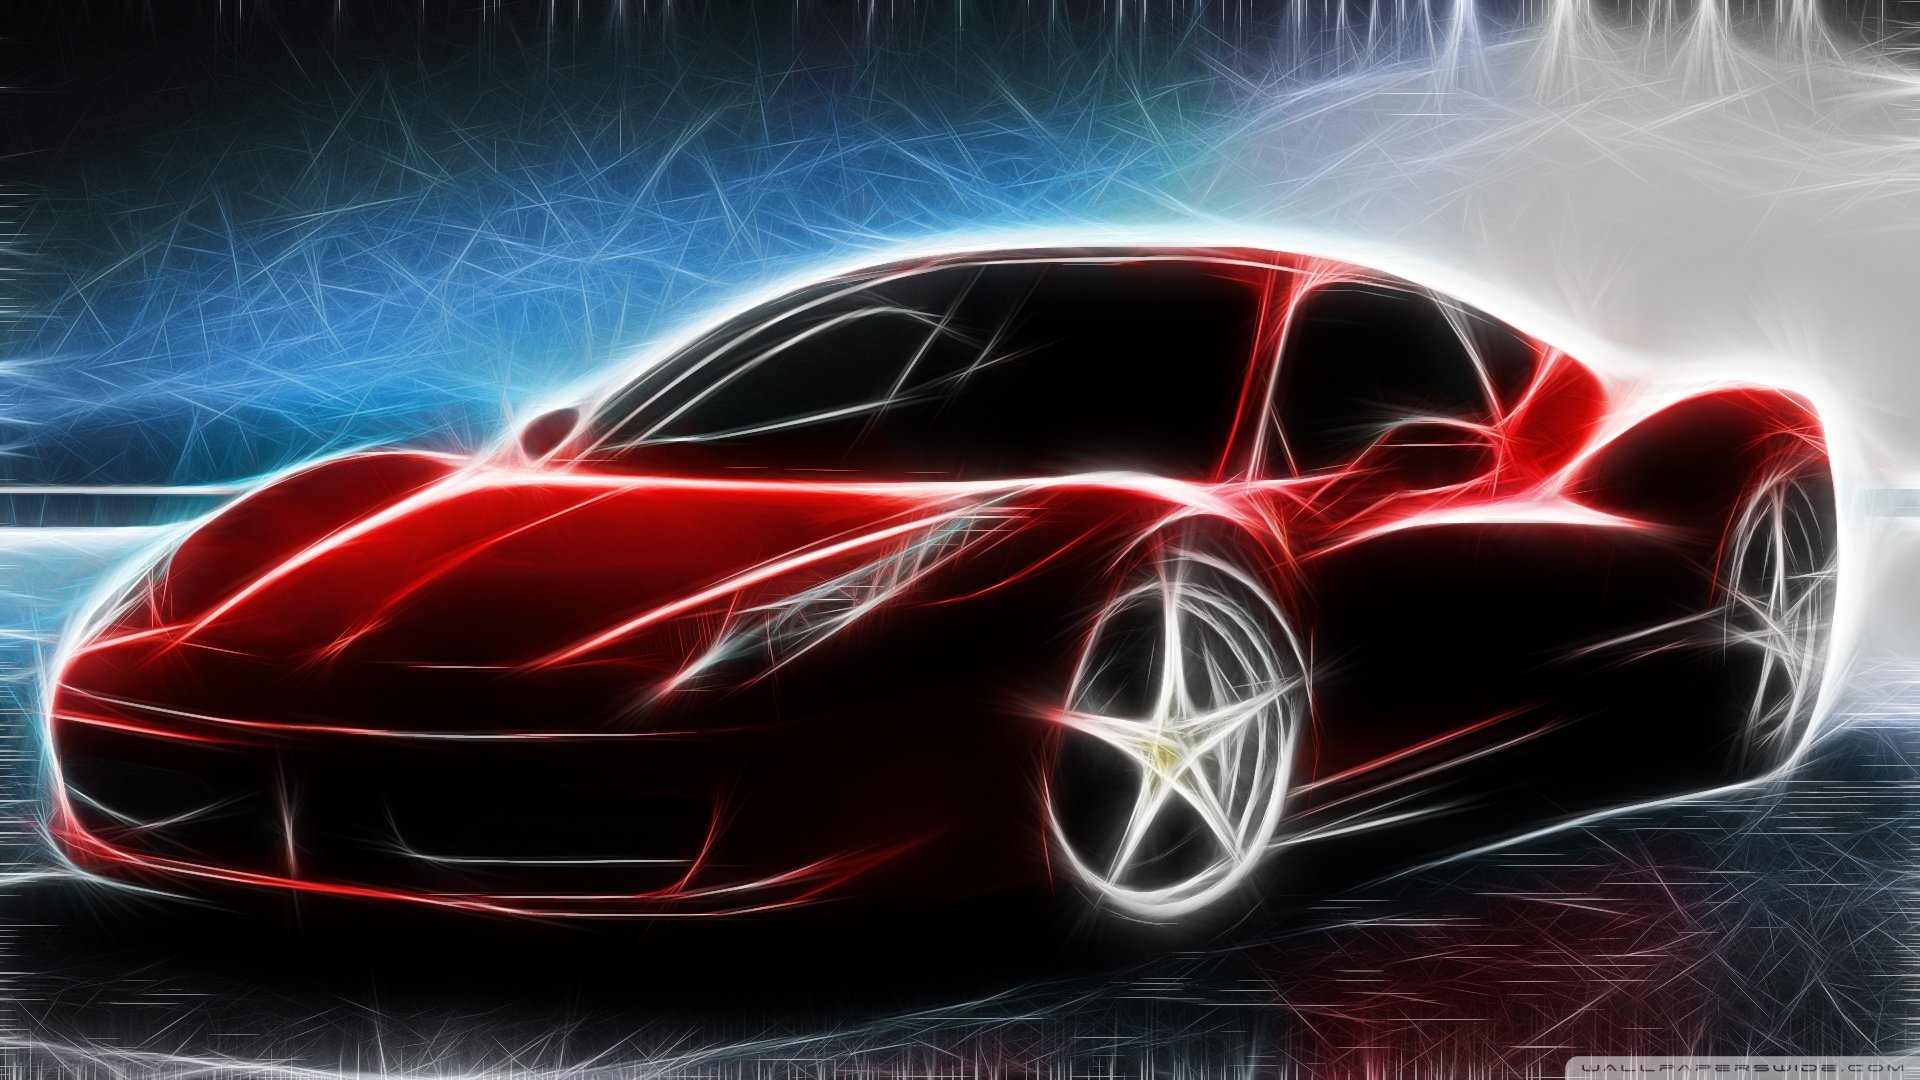 Coolest Collection of Ferrari Wallpaper amp Backgrounds In HD 1920x1080